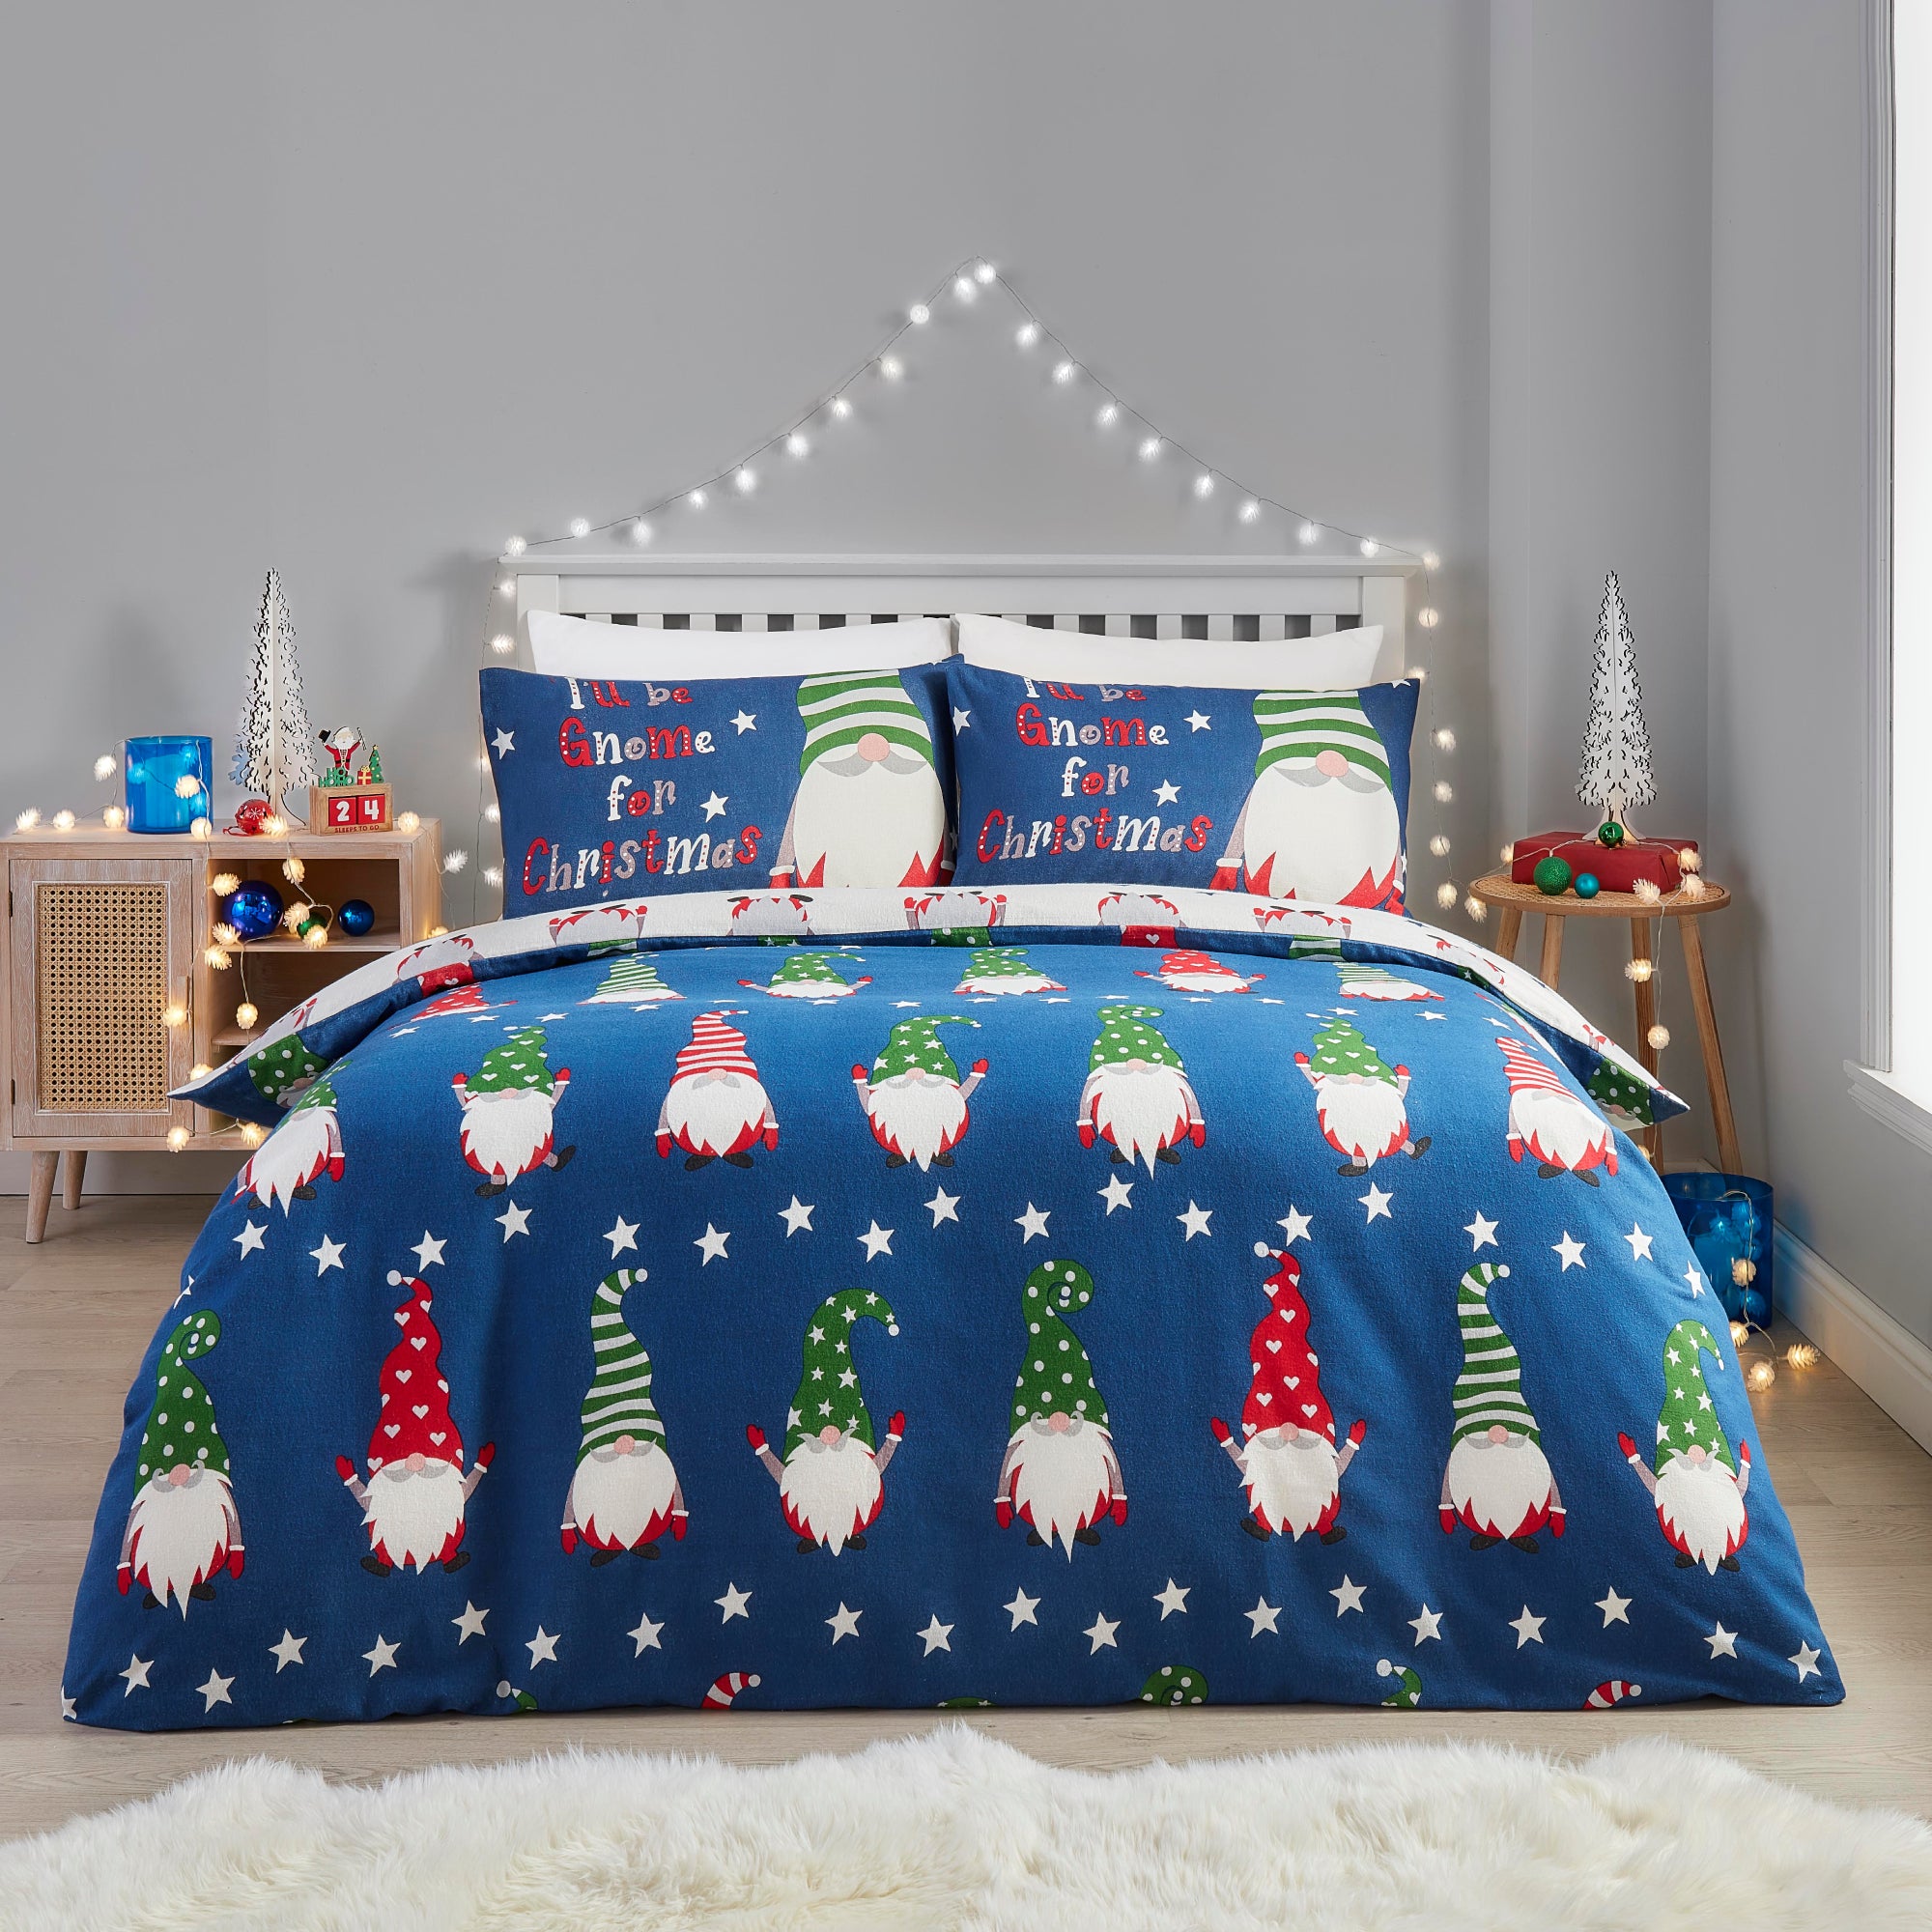 Duvet Cover Set Gnome For Christmas by Fusion Christmas in Navy